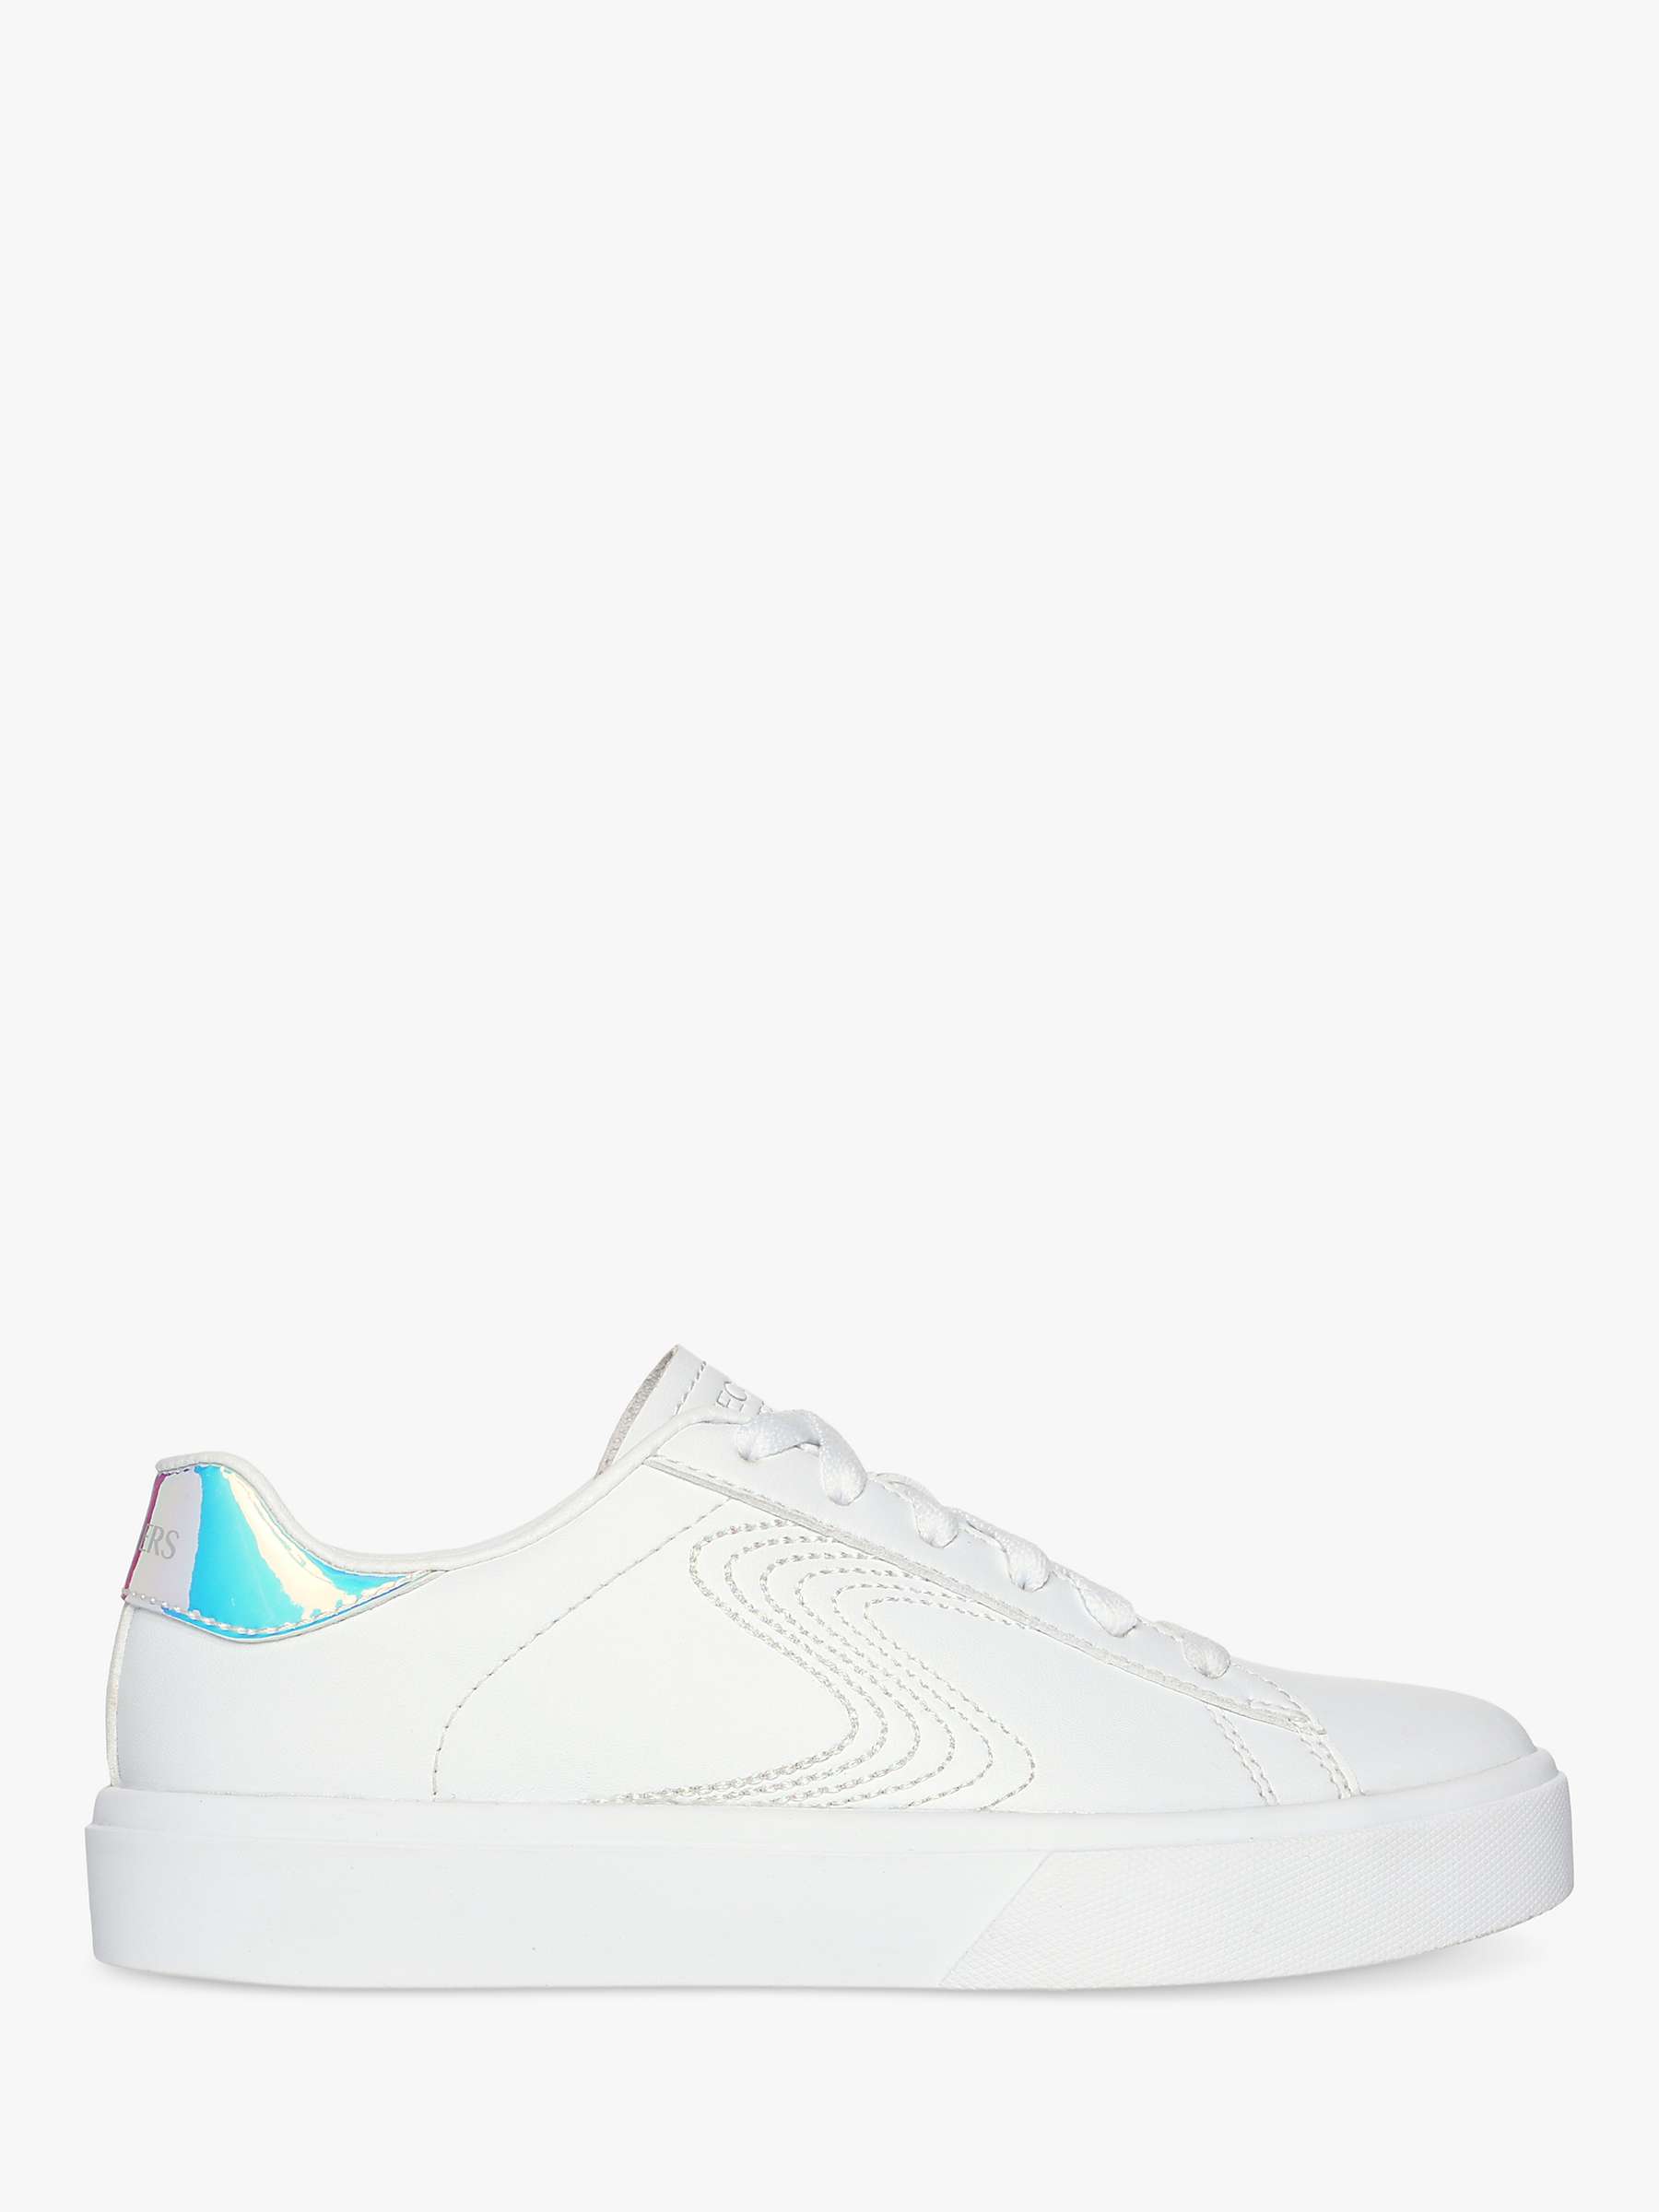 Buy Skechers Kids' Eden LX Lace Up Trainers, White Online at johnlewis.com